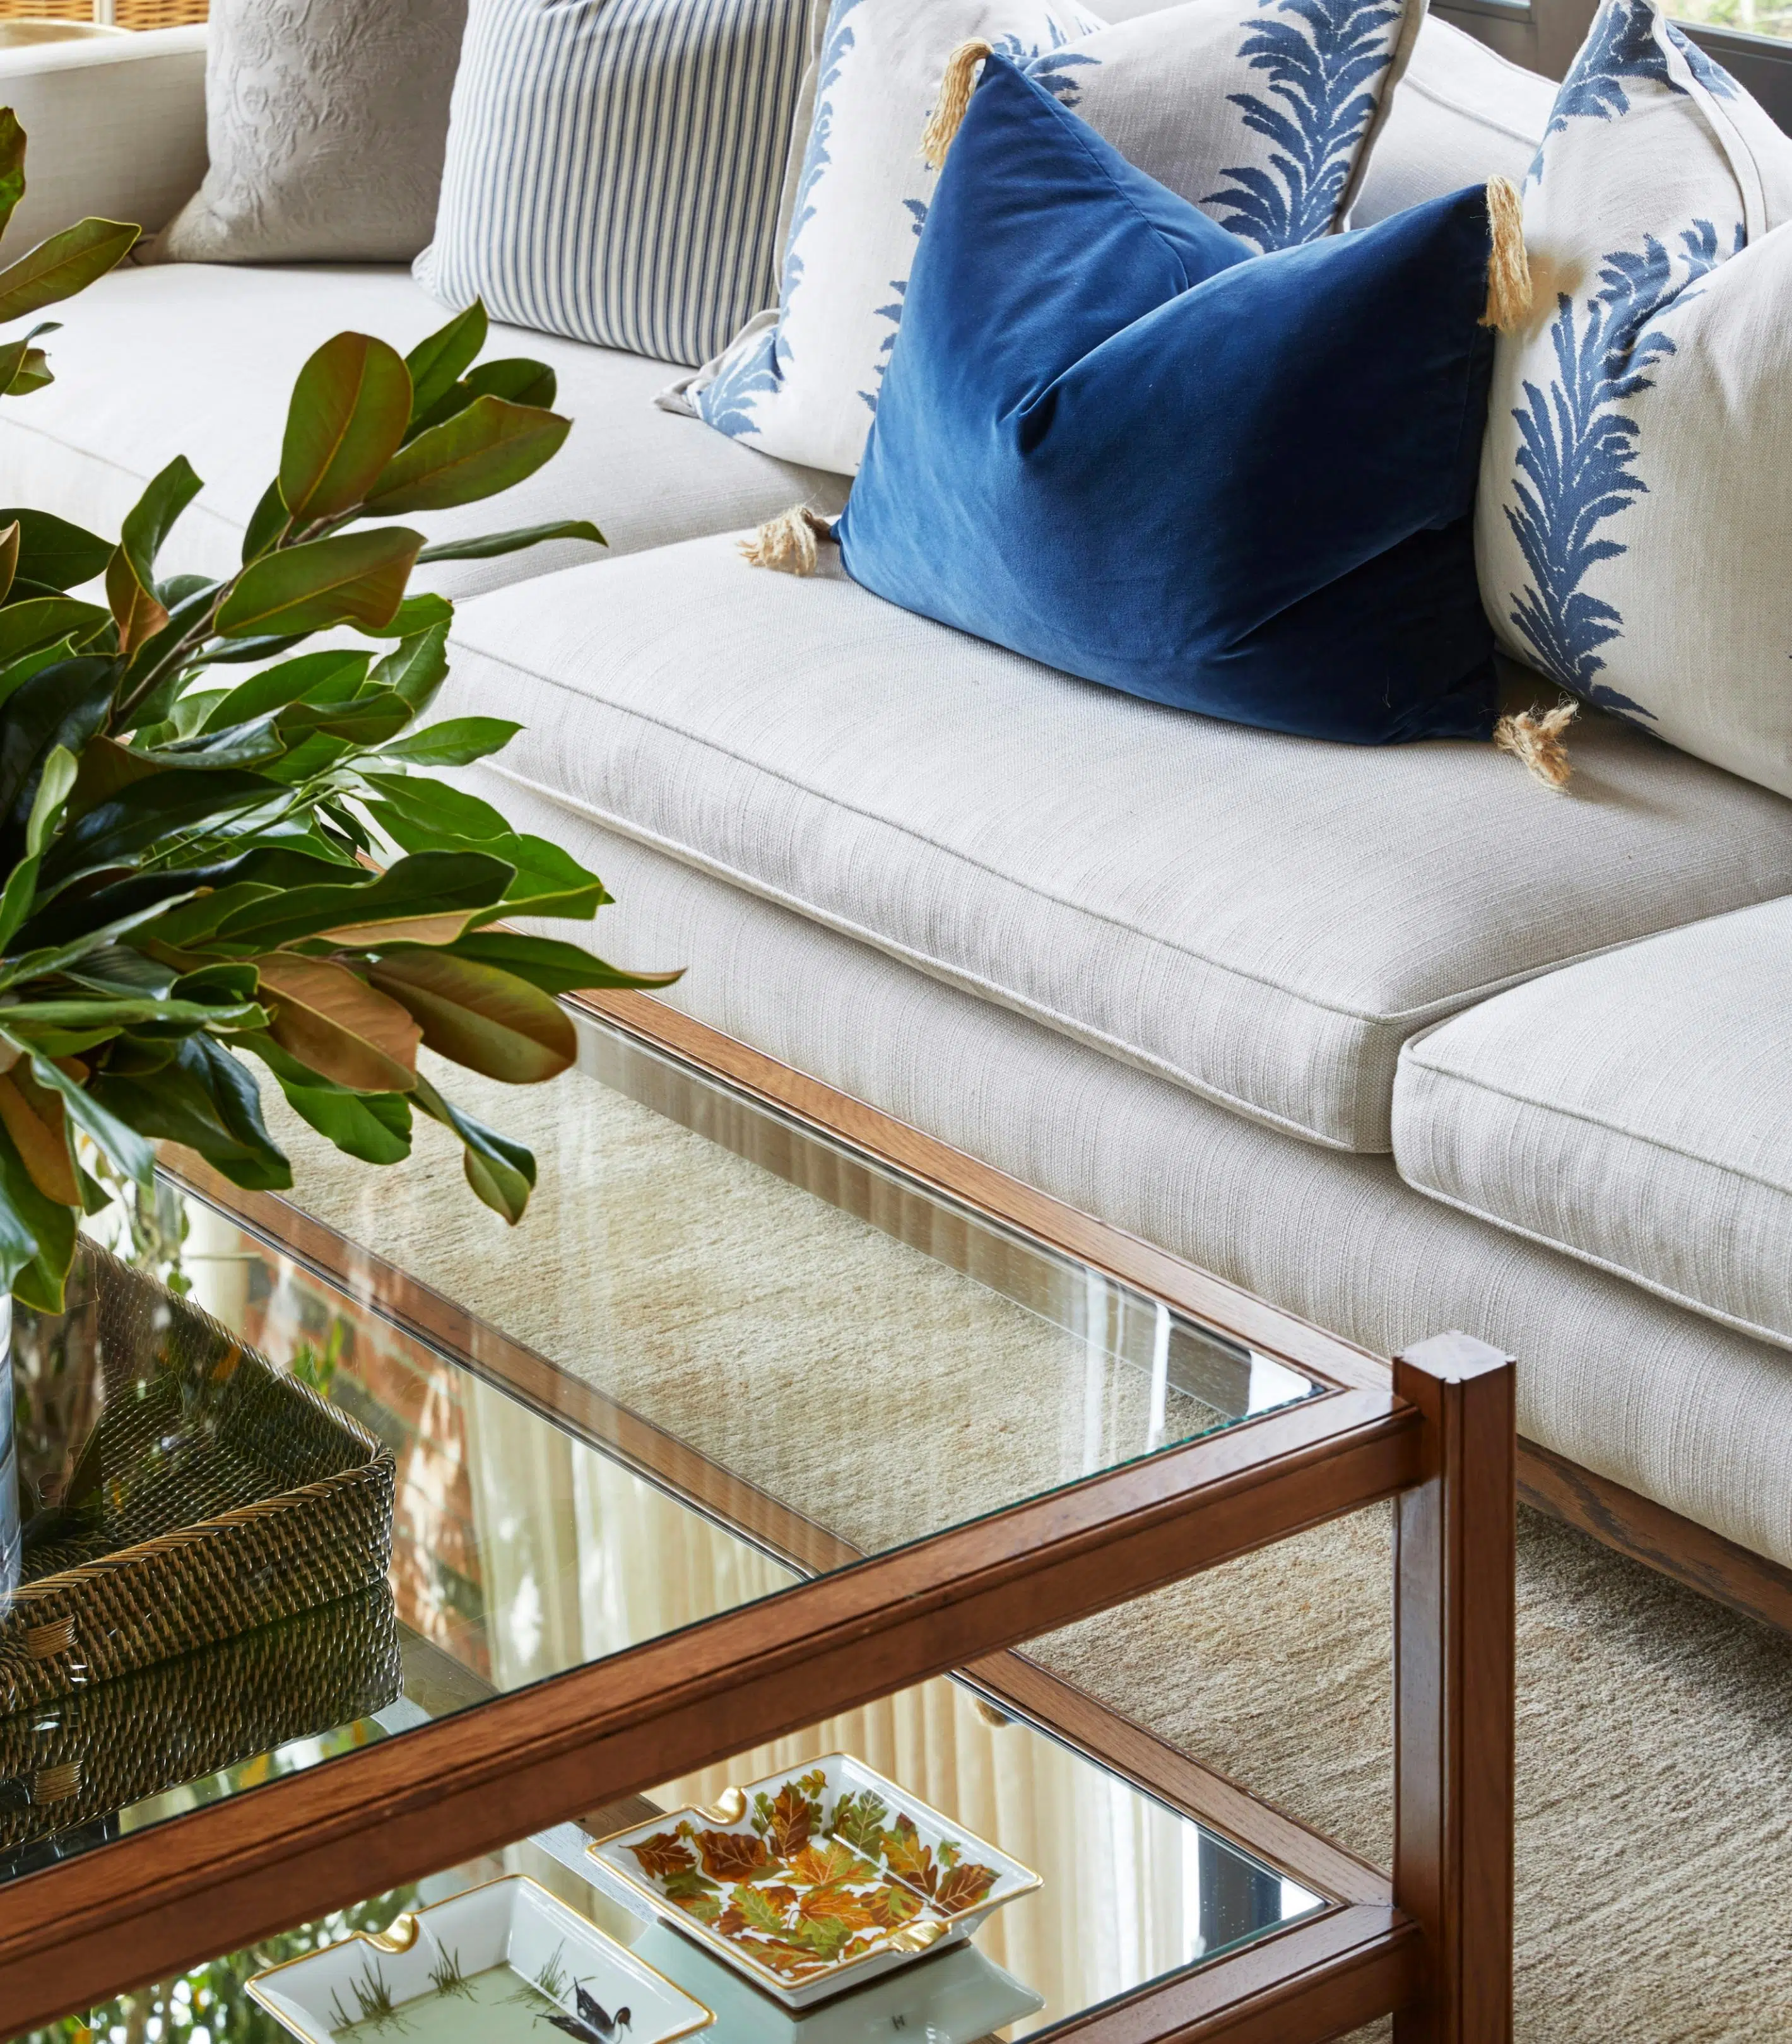 A wooden-framed coffee table with a mirrored base and clear glass table top holds ornate ashtrays on its lower levels and what appears to be a vase of greenery on its top. A neutral coloured couch is visible, holding blue and blue-patterned cushions